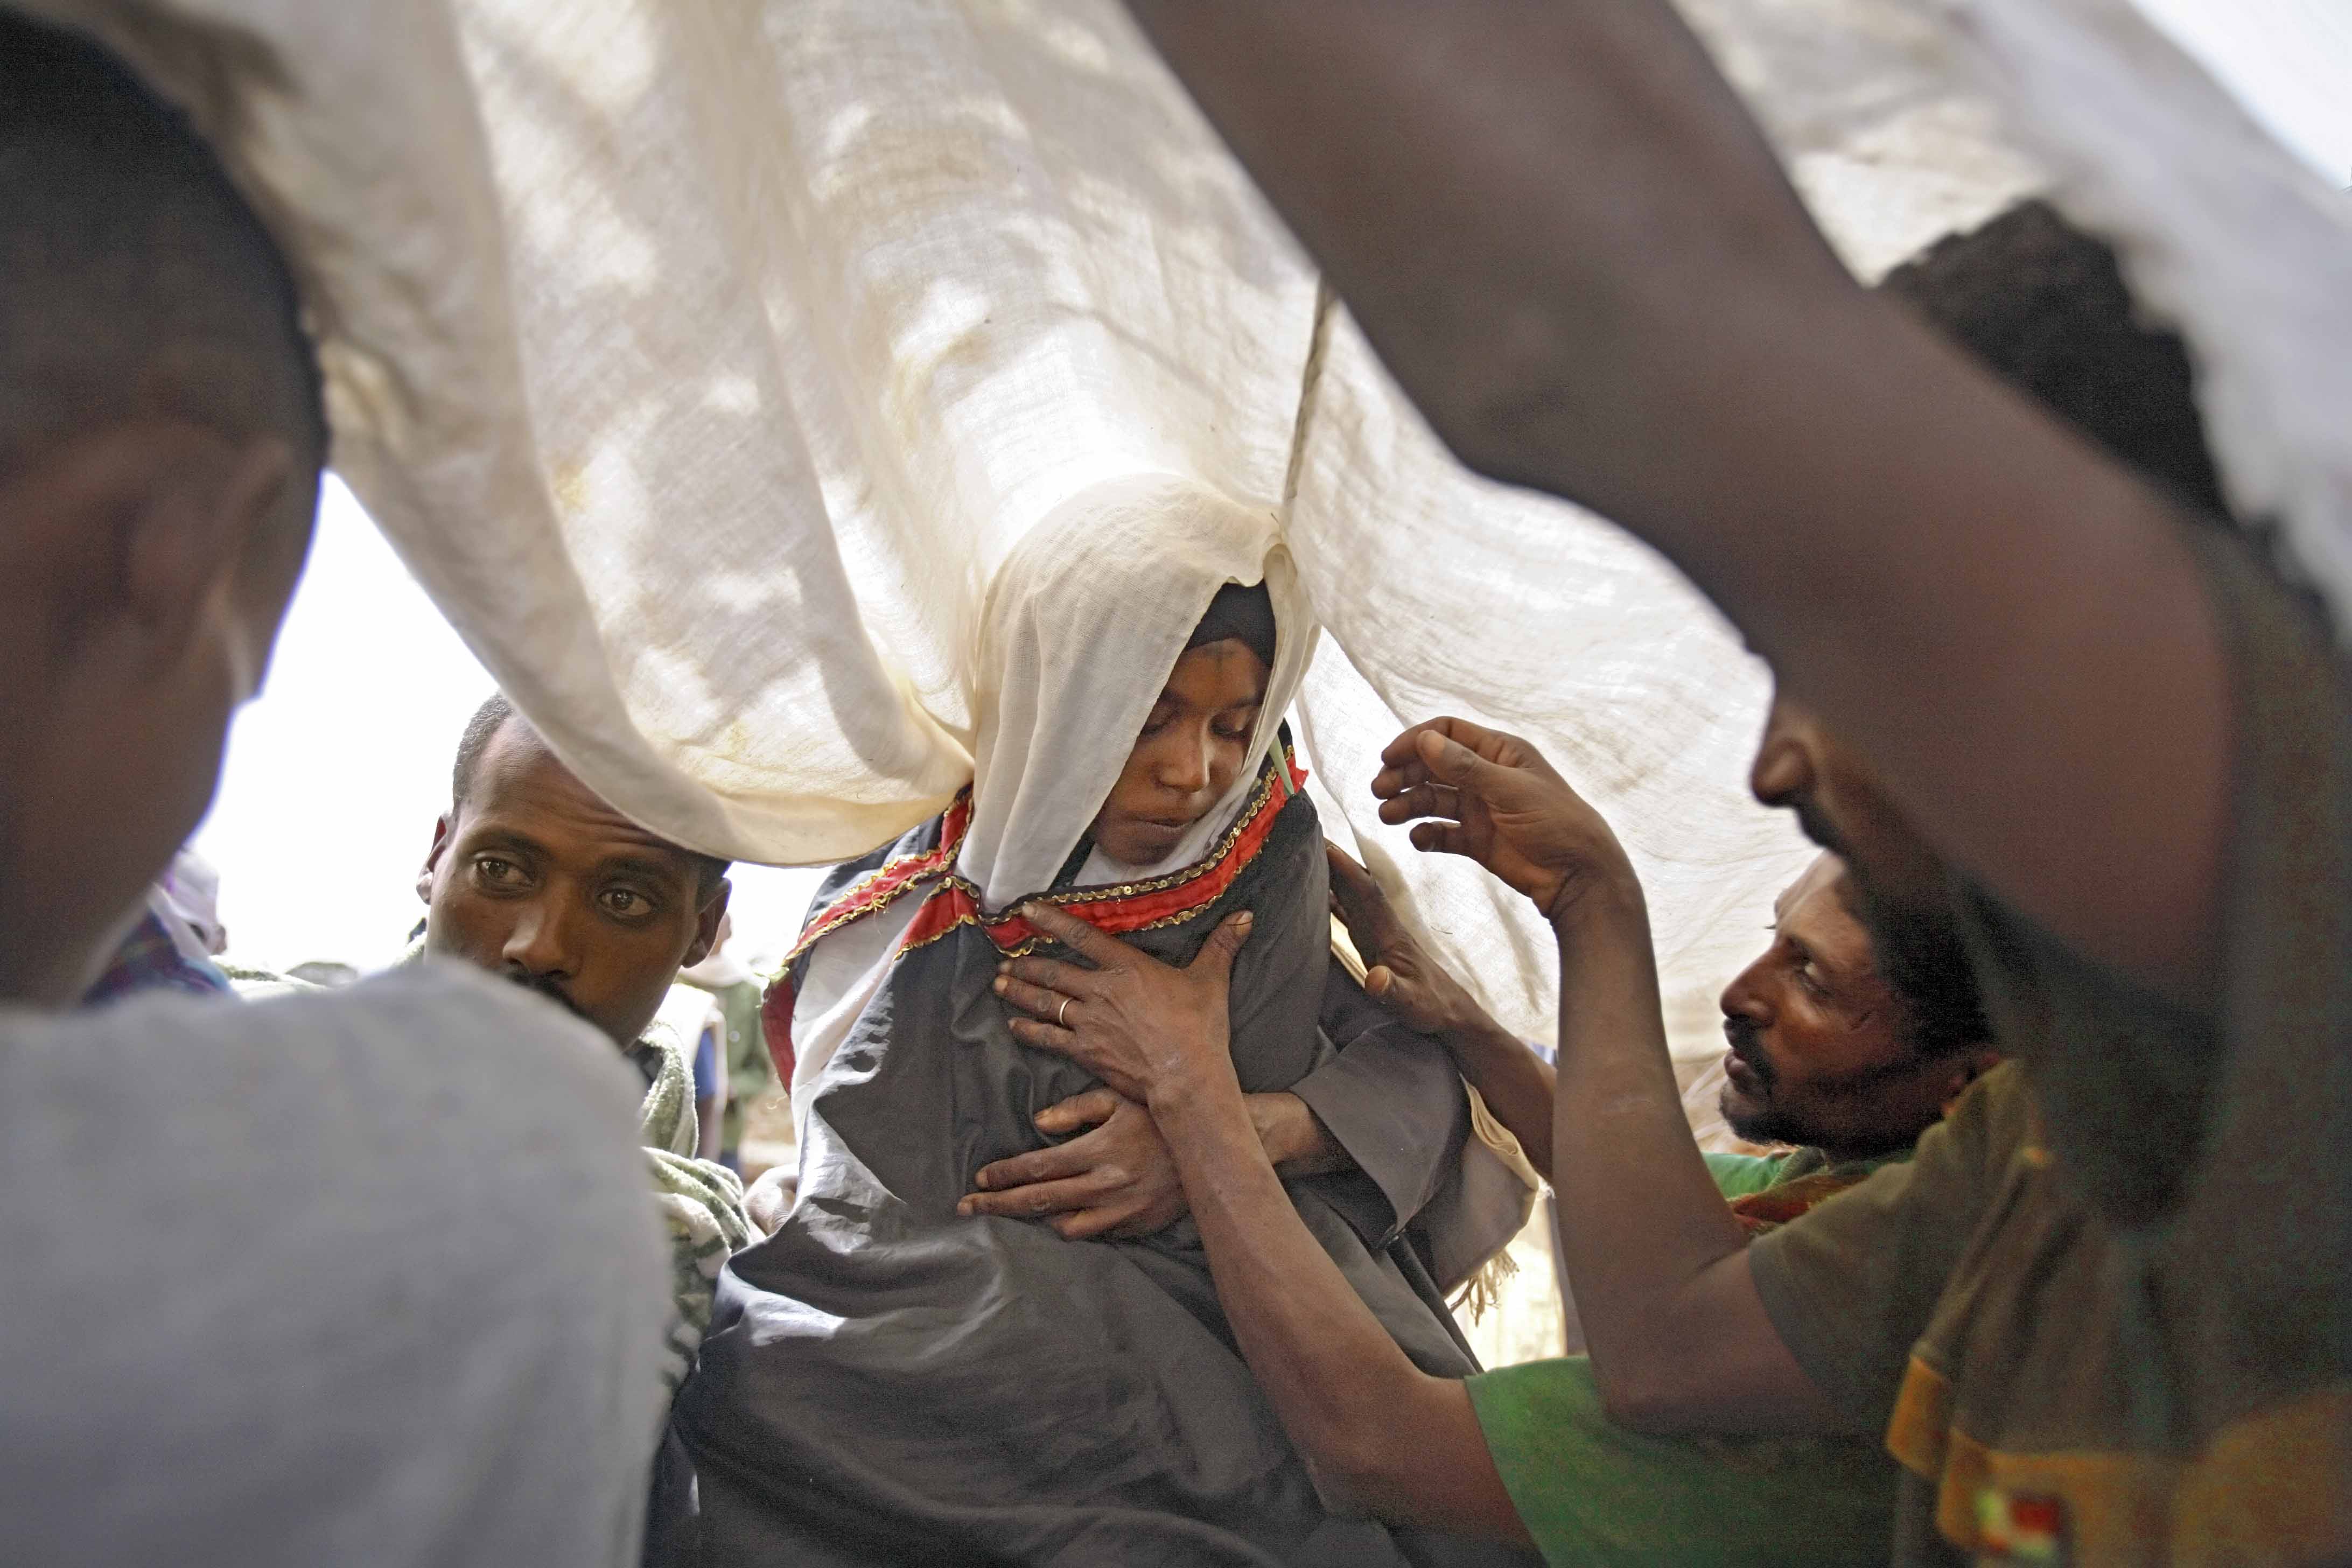 Family members place a white cloth over the head of Leyualem, 14, as she is prepared to be whisked away on a mule by her new groom and his groomsmen in Ethiopia.